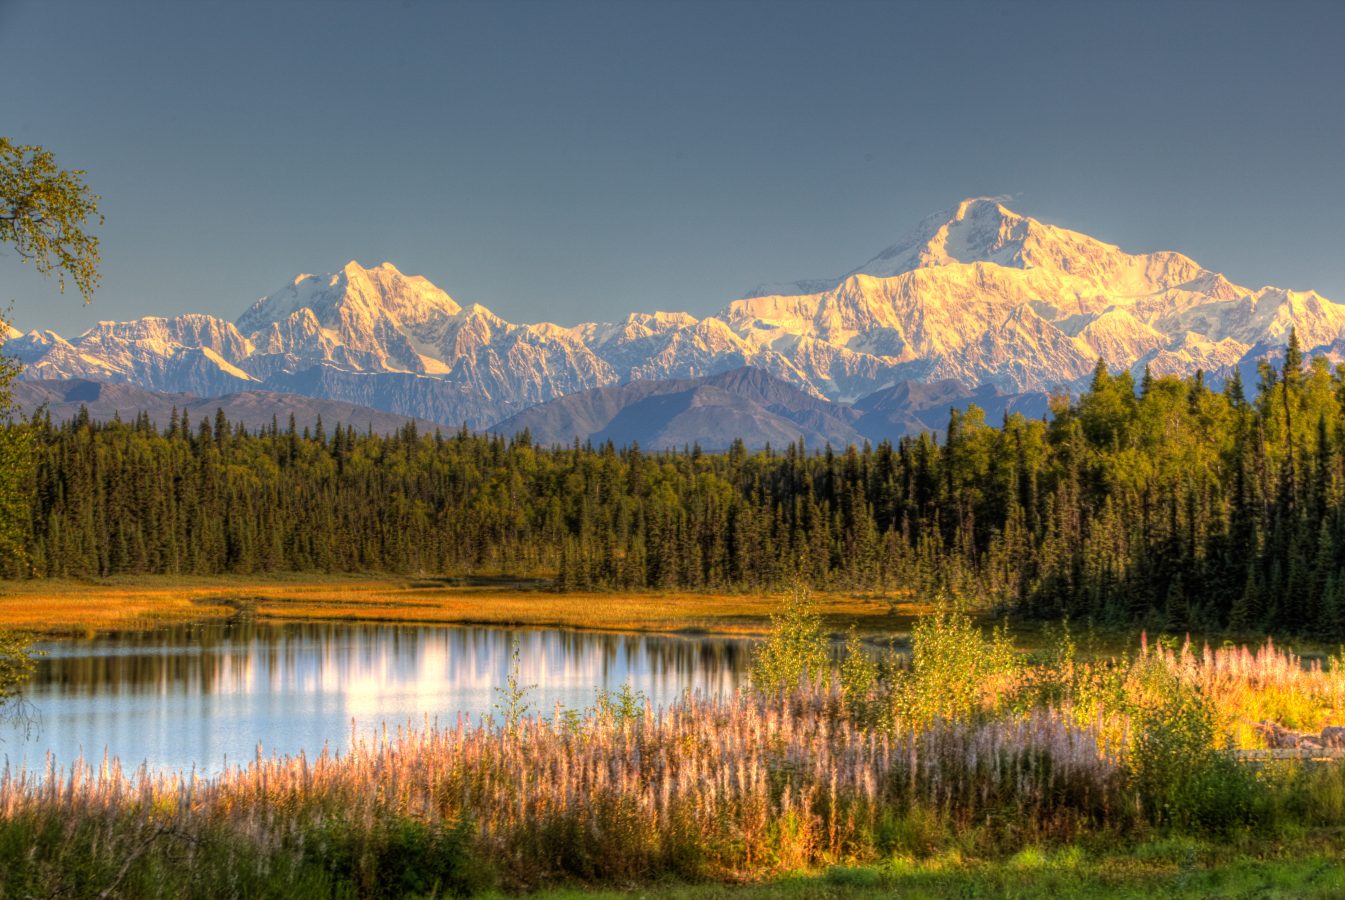 Sunrise on the mountains in Denali National Park, Alaska, USA with a lake in the foreground.